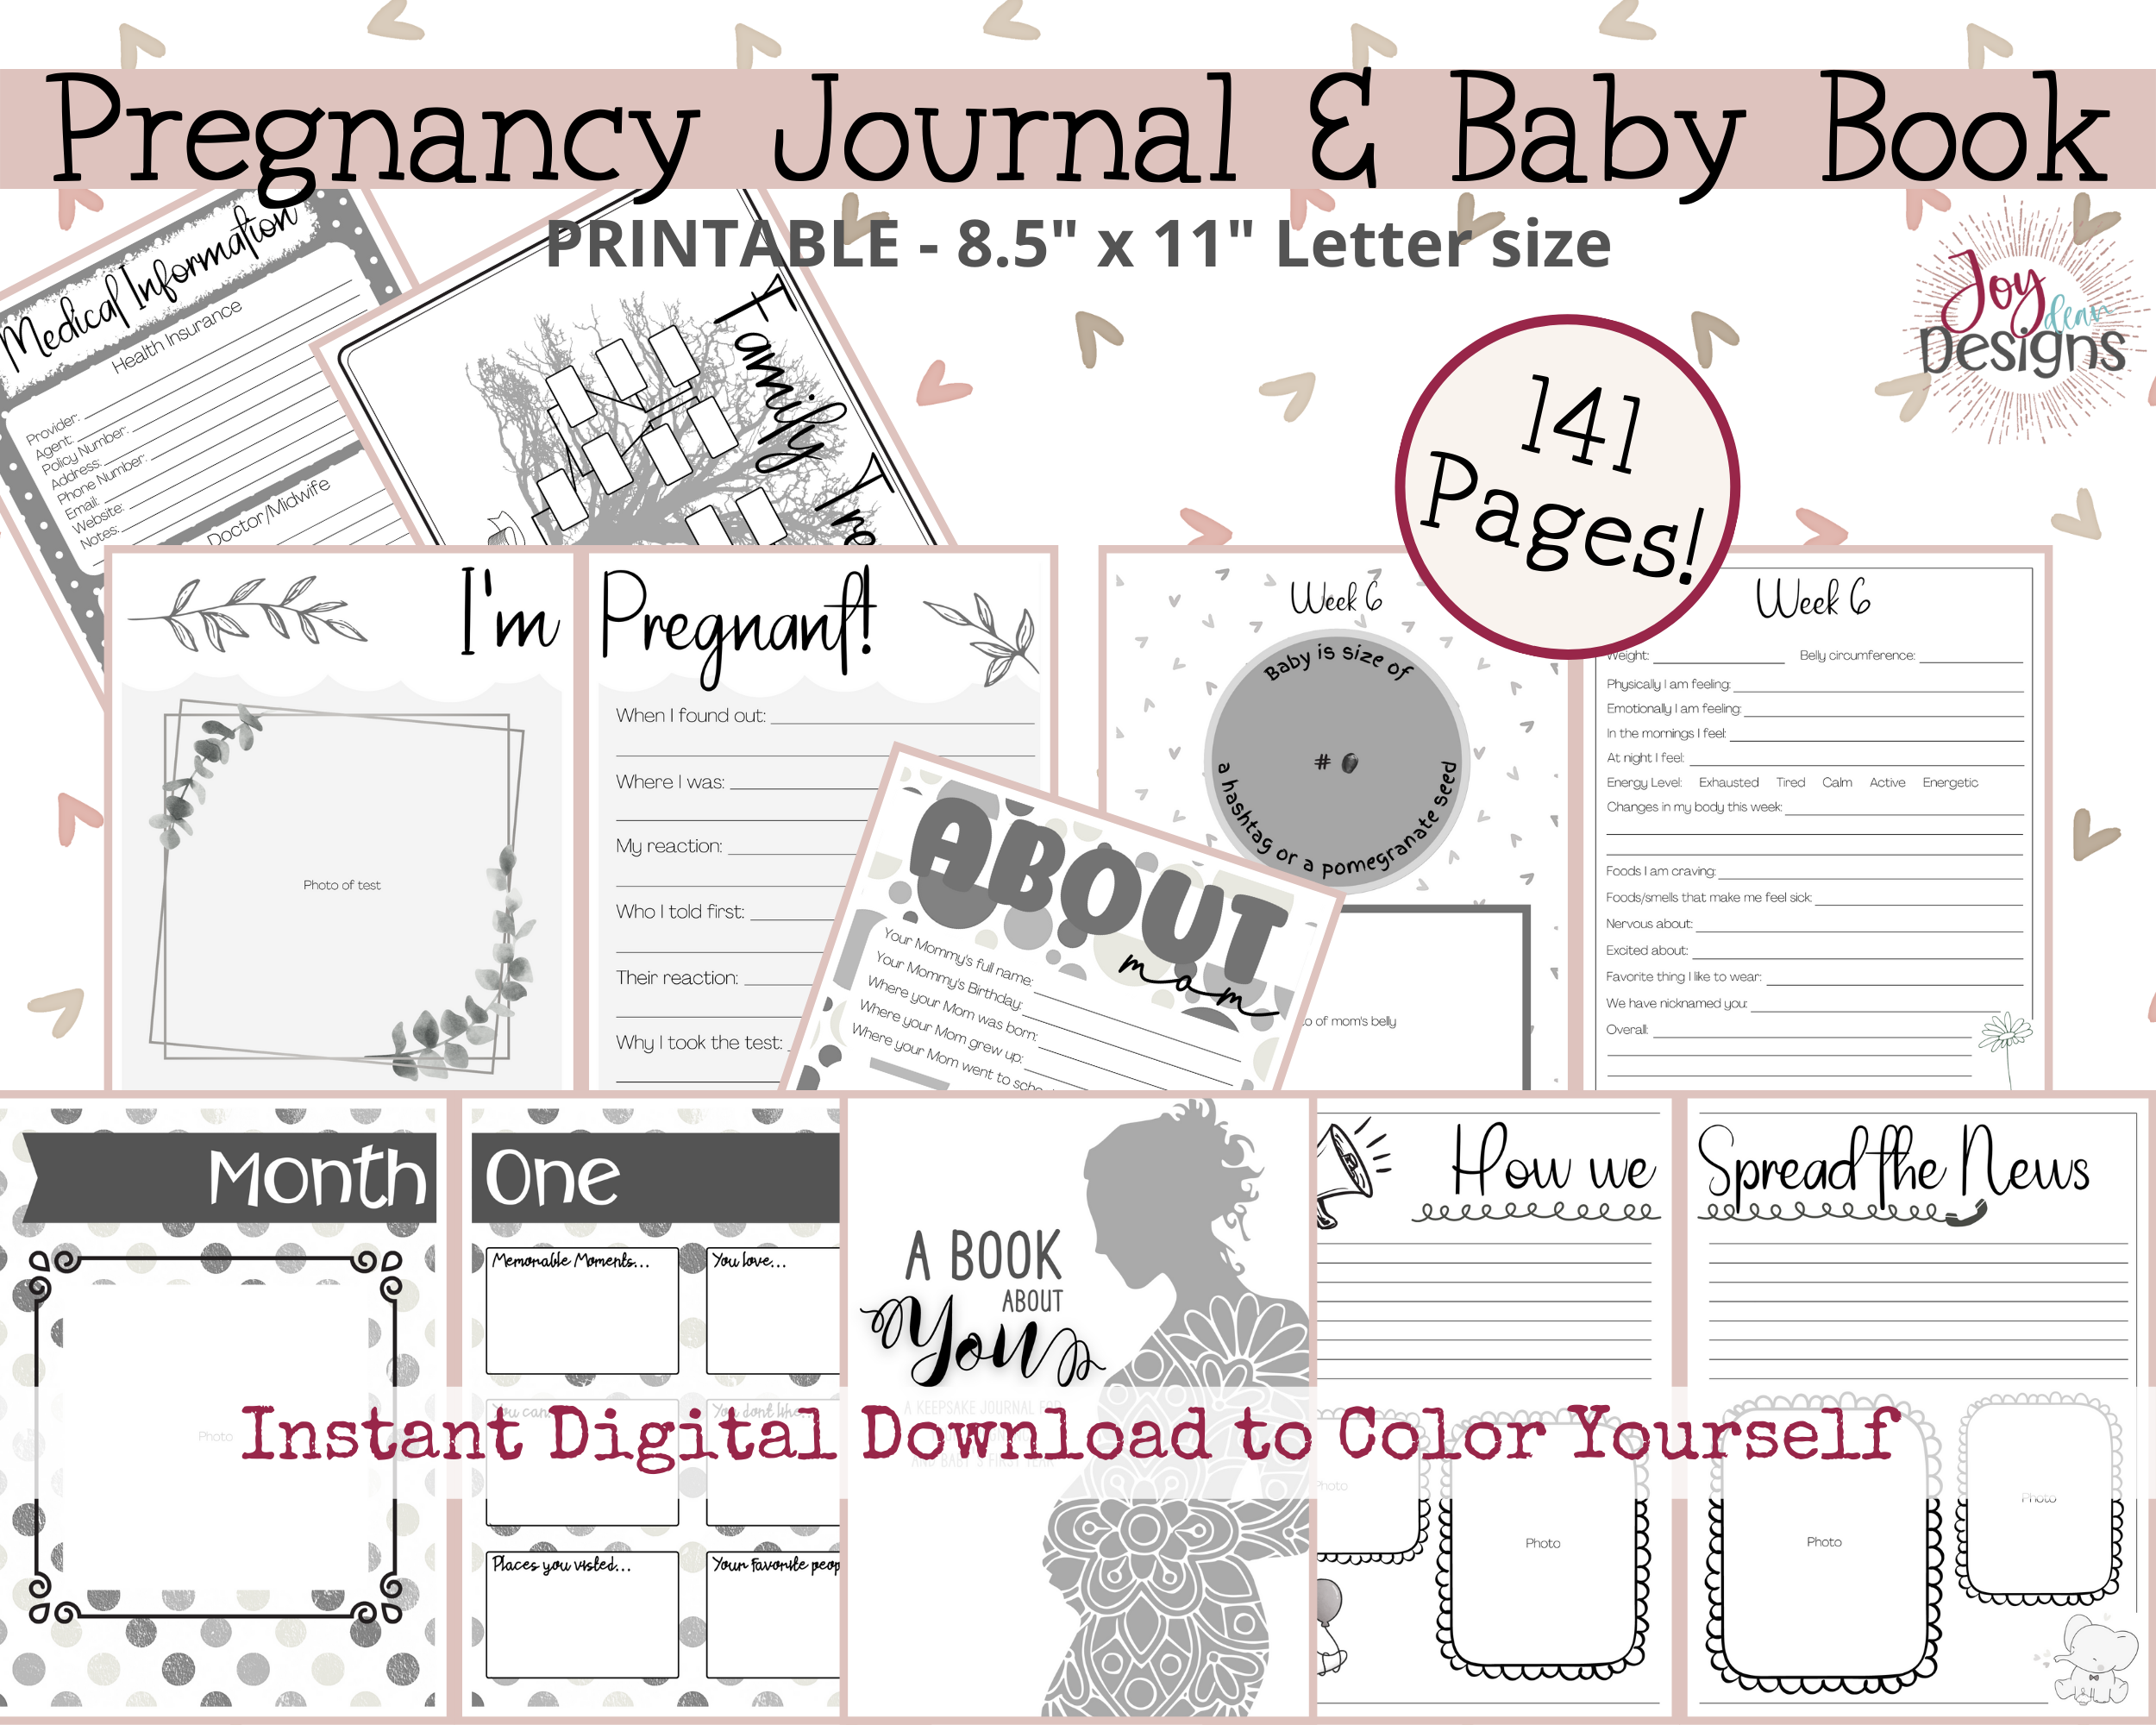 5 Minutes Morning Journal l KDP Template